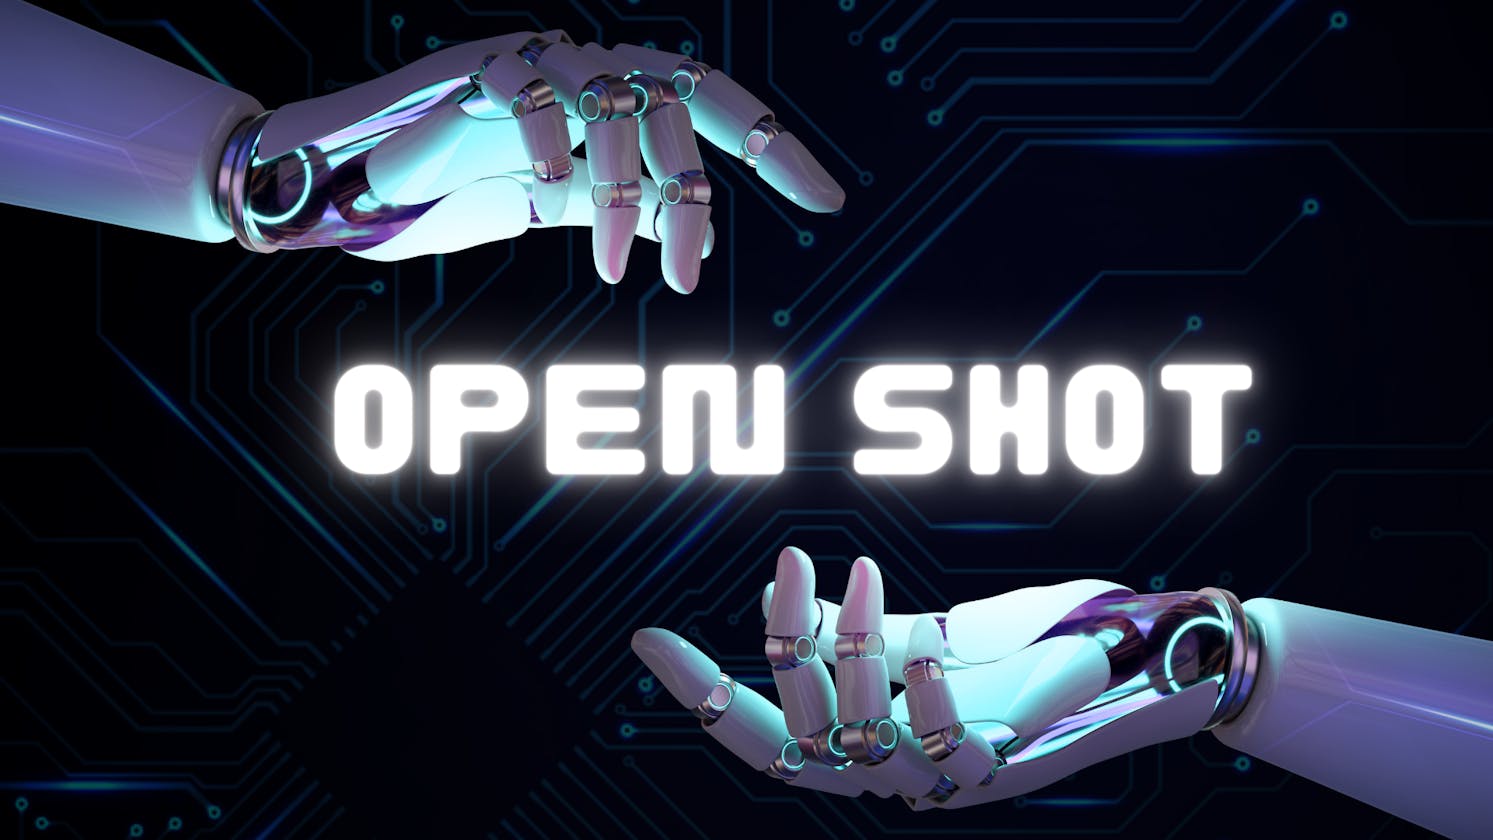 OpenShot - Building the source code in dev system